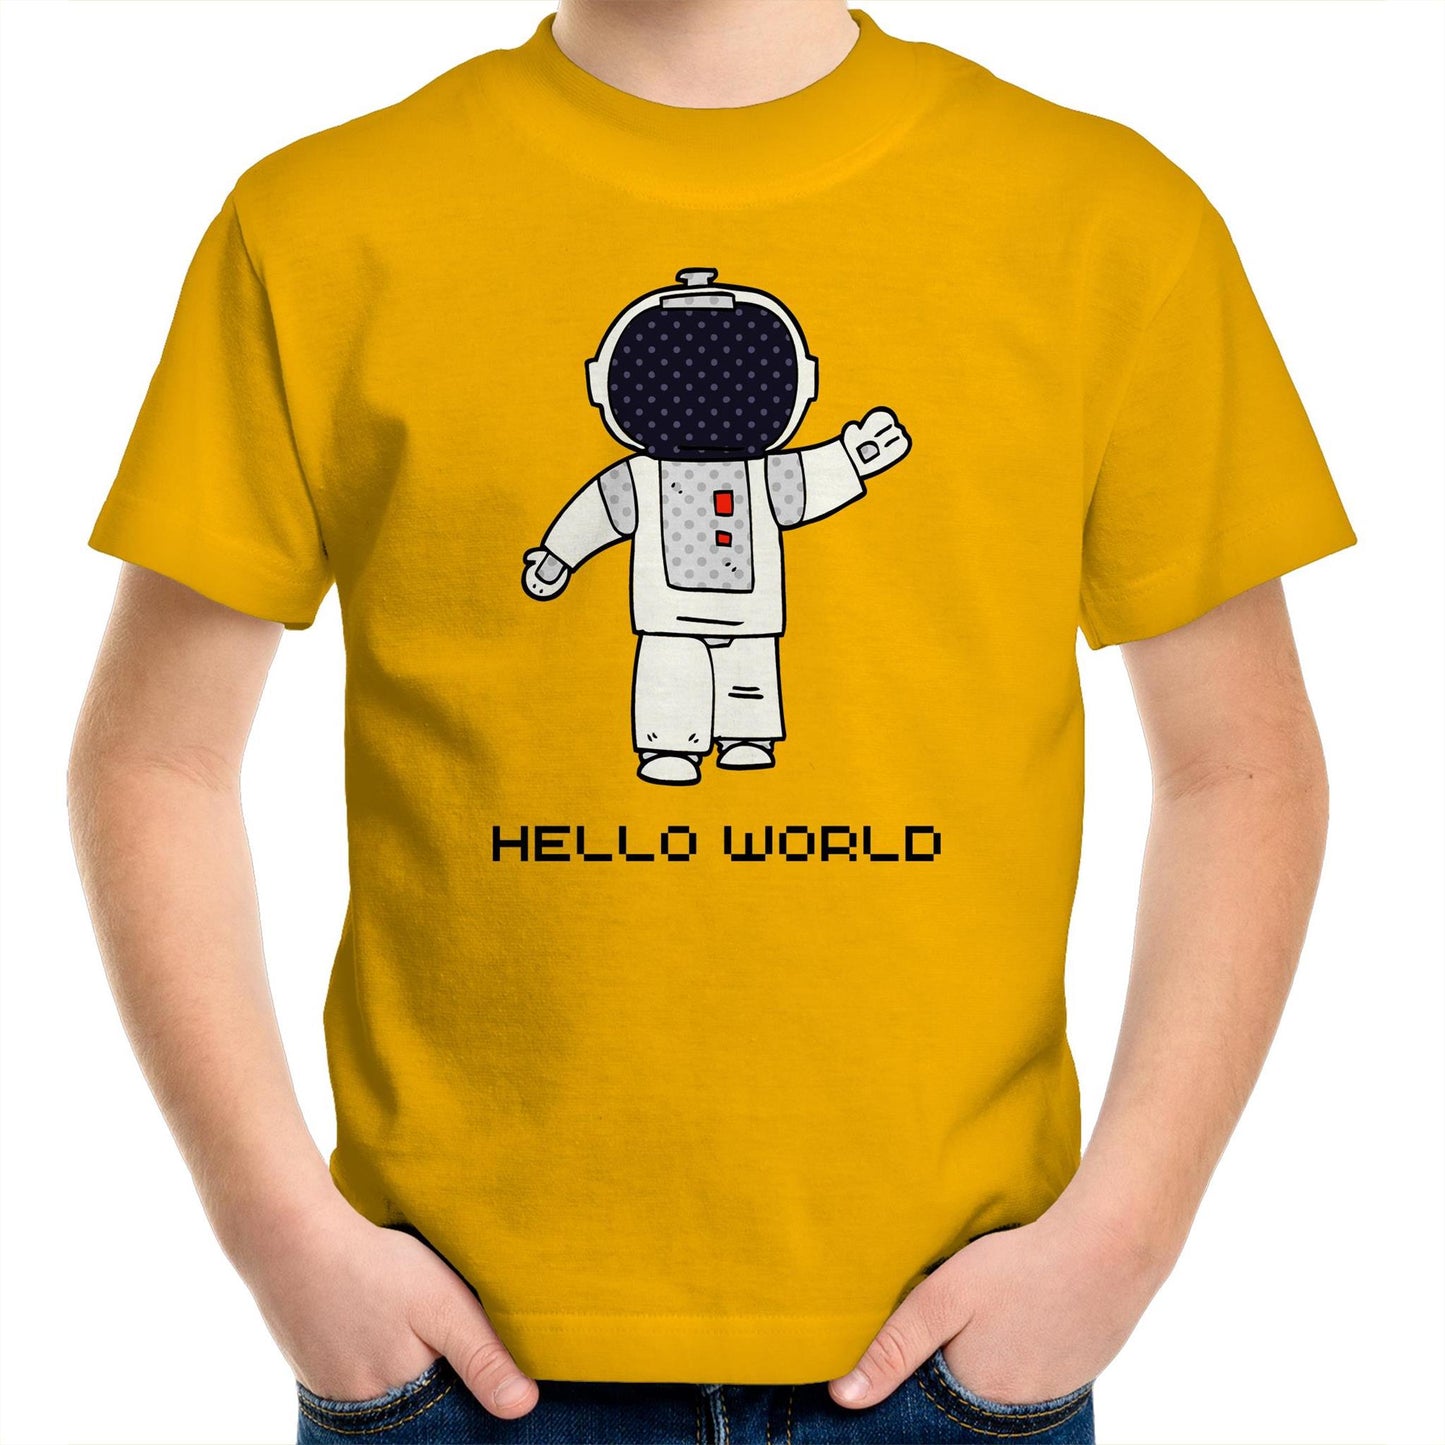 Astronaut, Hello World - Kids Youth T-Shirt Gold Kids Youth T-shirt Space